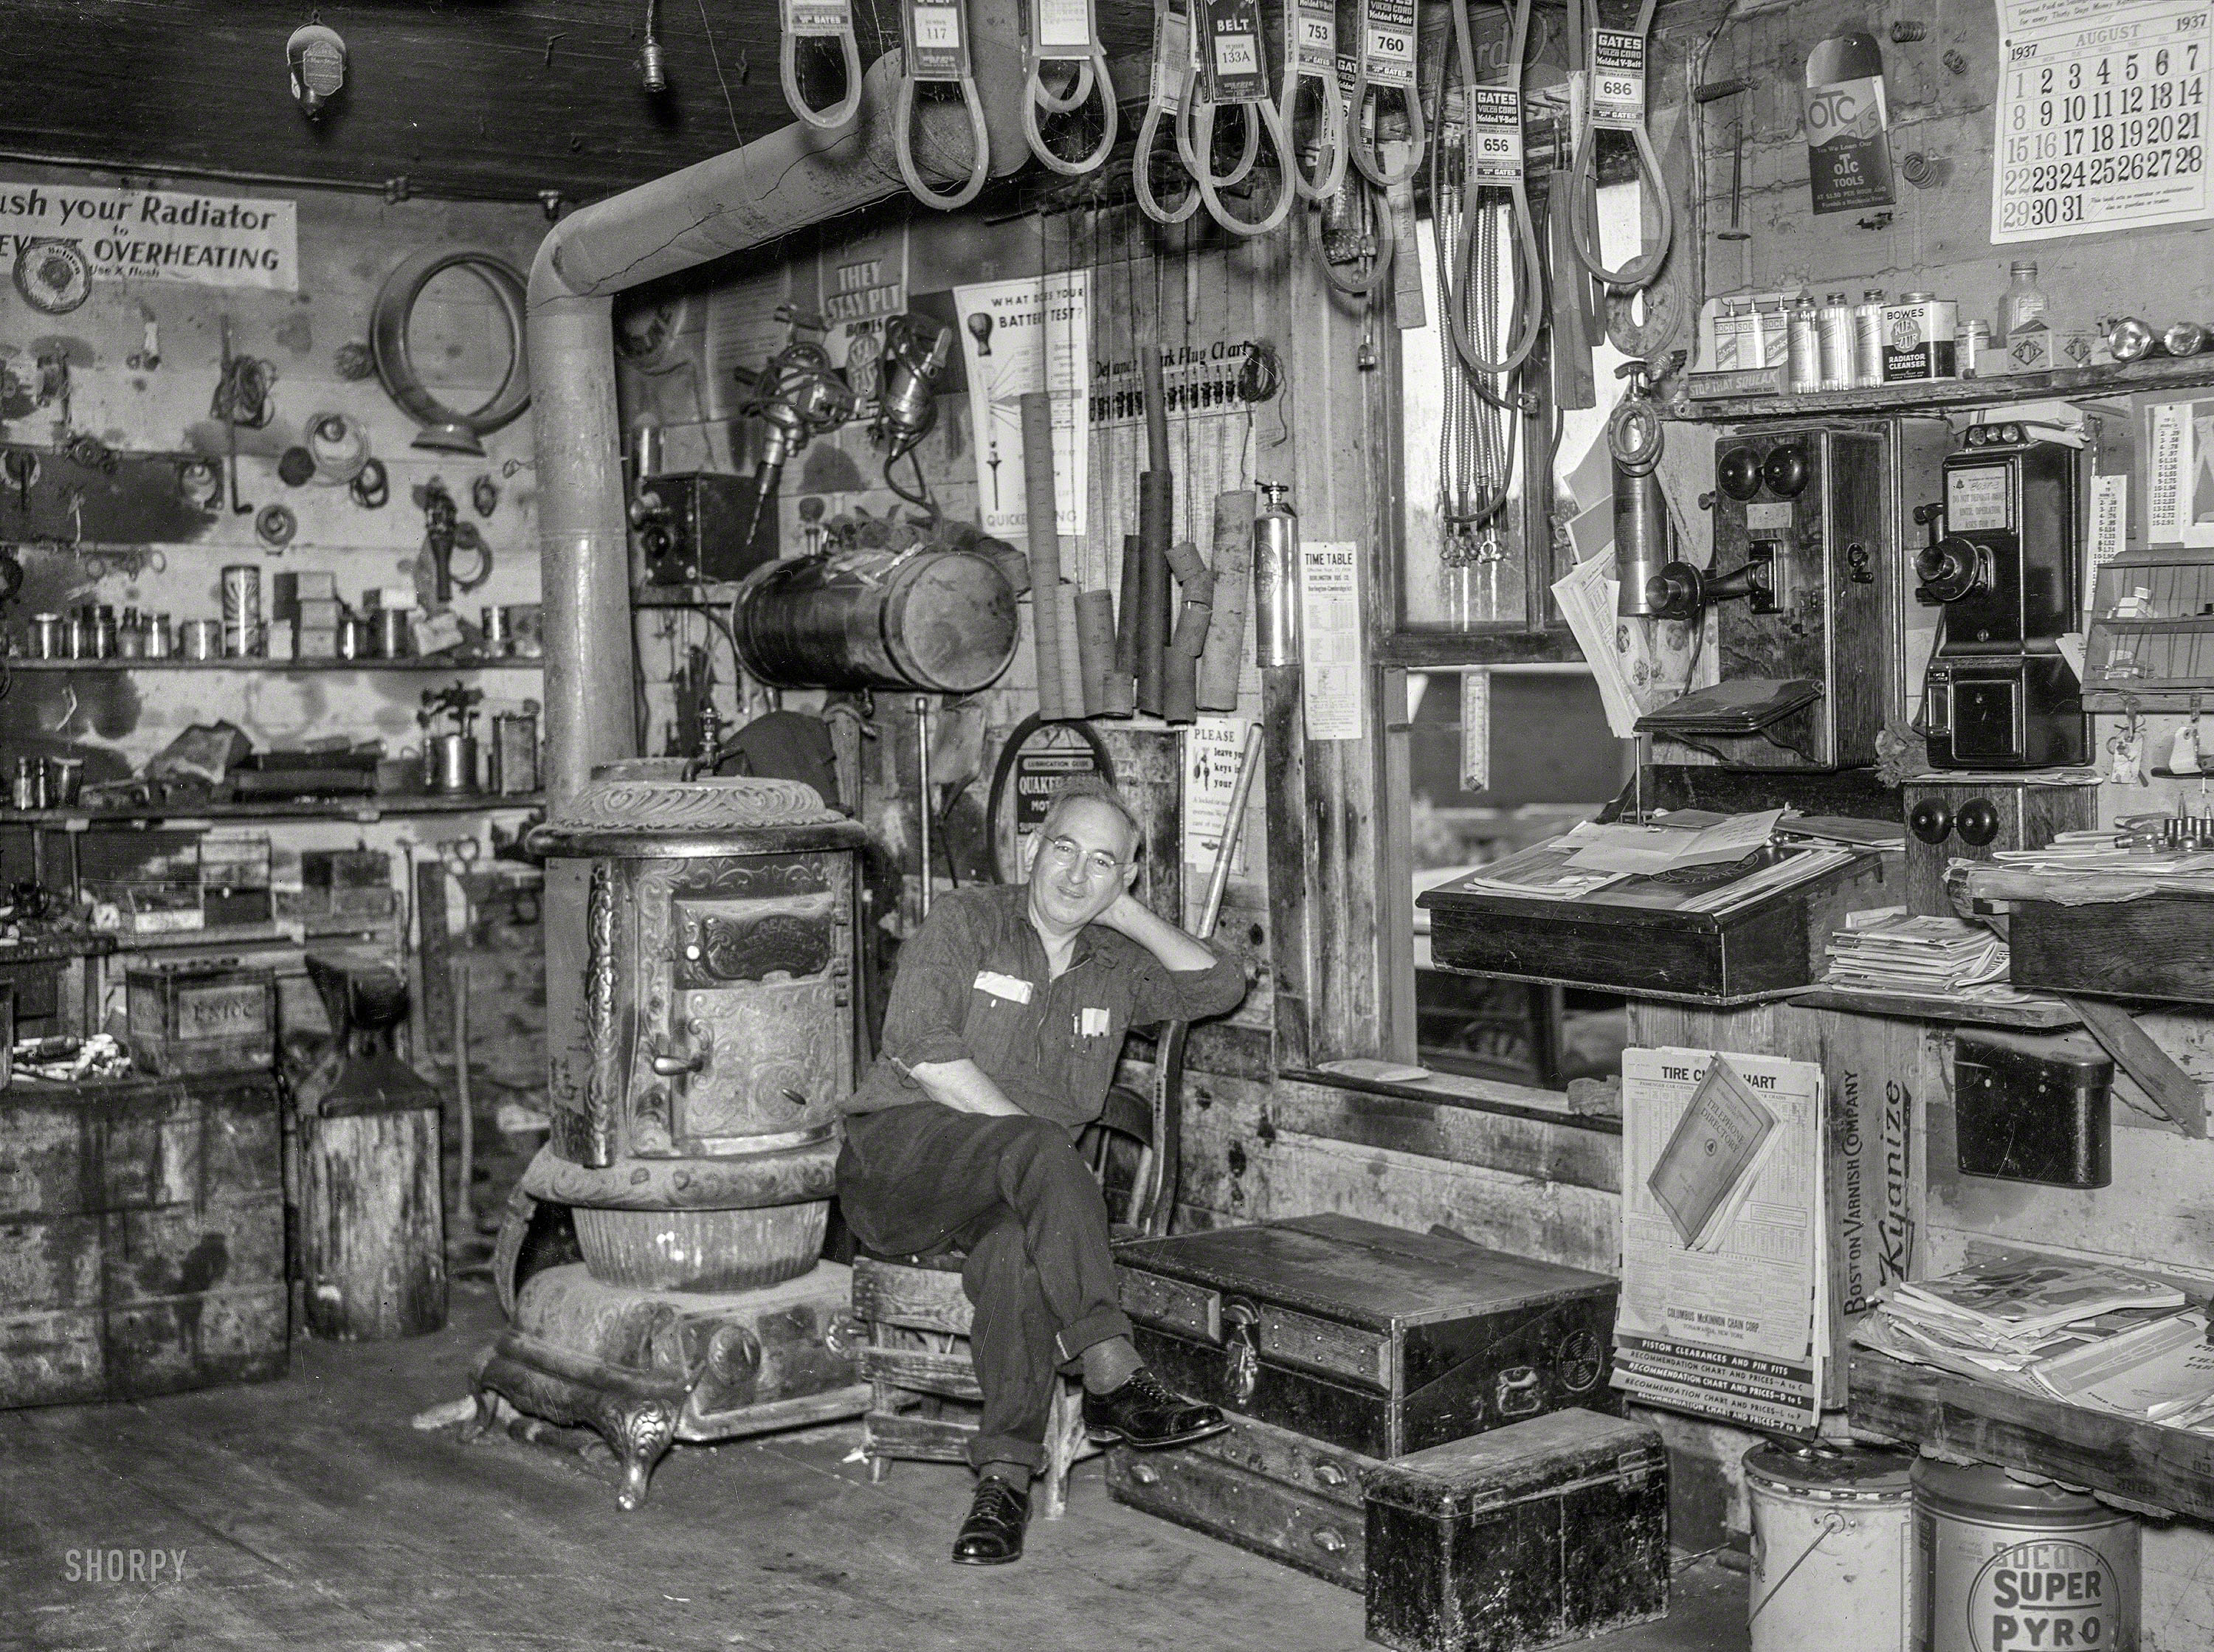 August 1937. "Blacksmith's shop turned into a garage. Cambridge, Vermont." Photo by Arthur Rothstein for the Farm Security Administration. View full size.